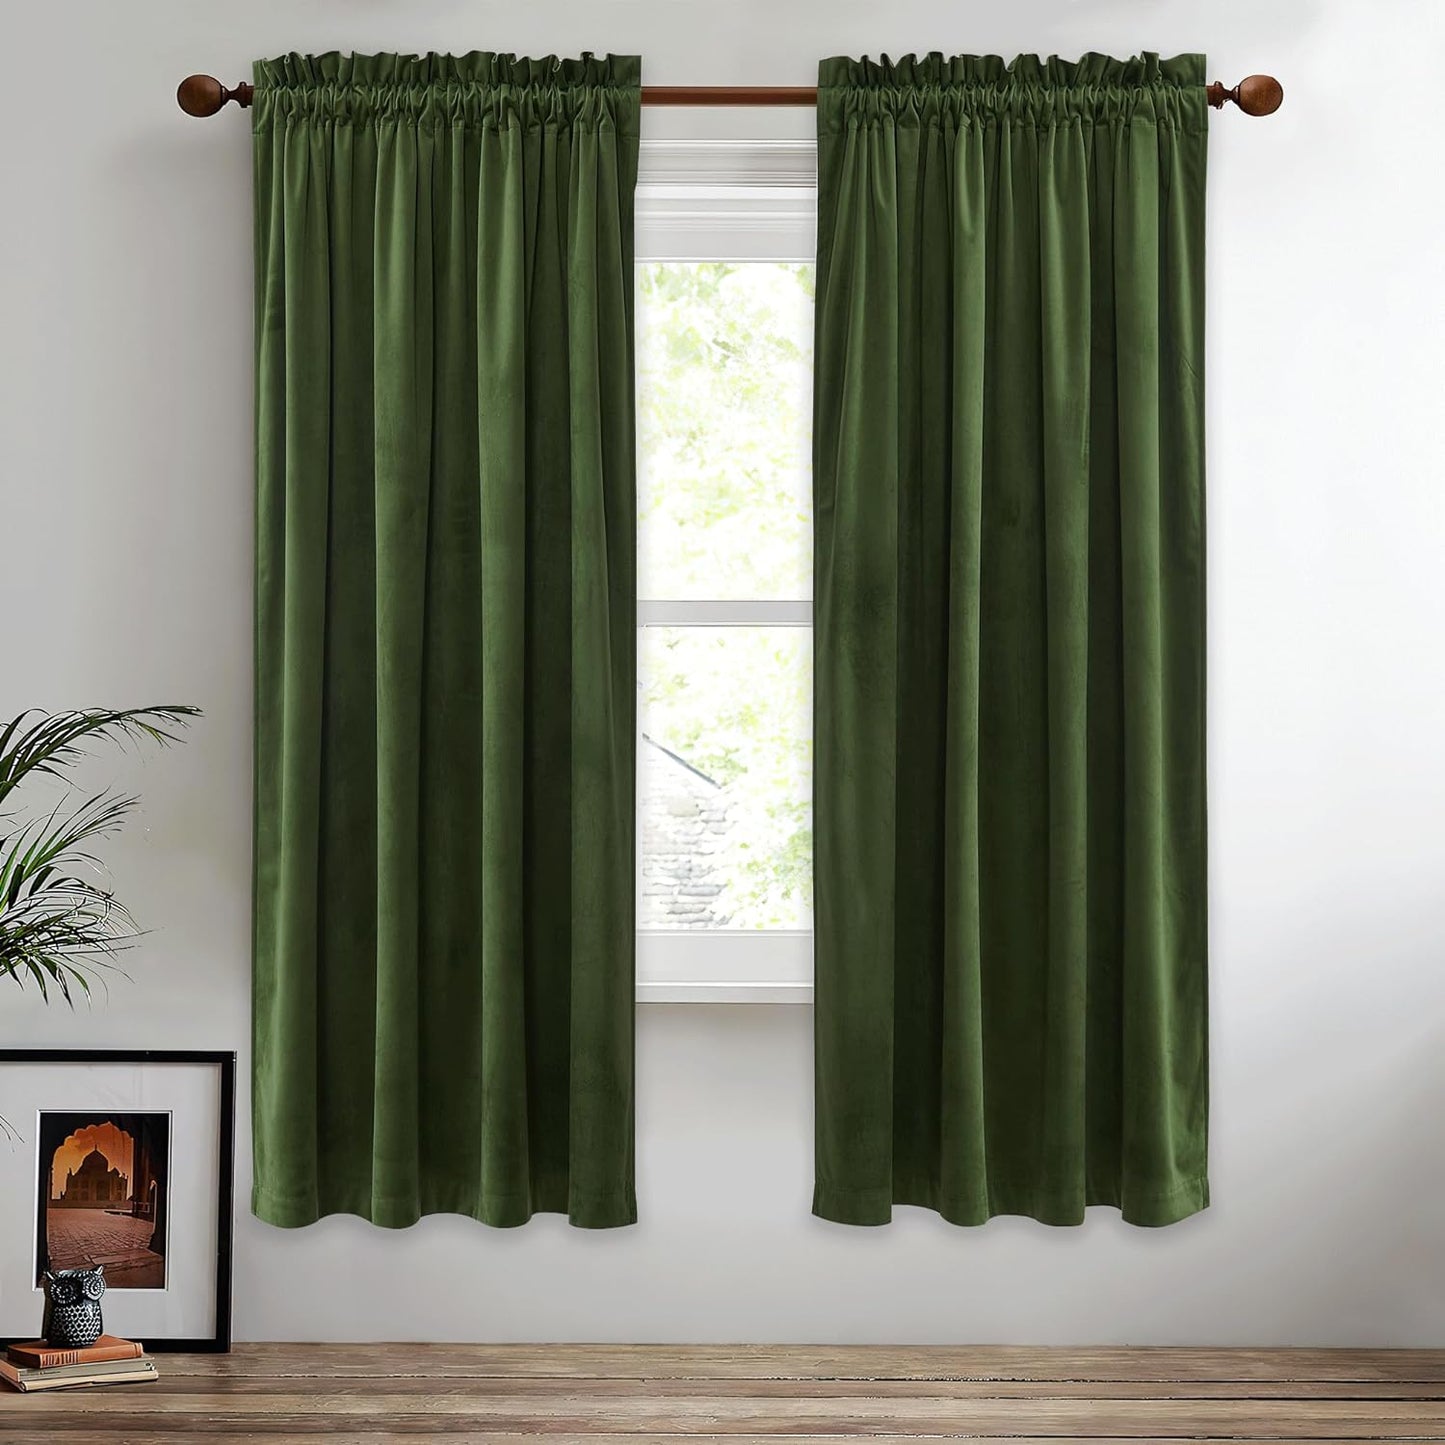 Stangh Theater Red Velvet Curtains - Super Soft Velvet Blackout Insulated Curtain Panels 84 Inches Length for Living Room Holiday Decorative Drapes for Master Bedroom, W52 X L84, 2 Panels  StangH Moss Green W52" X L72" 